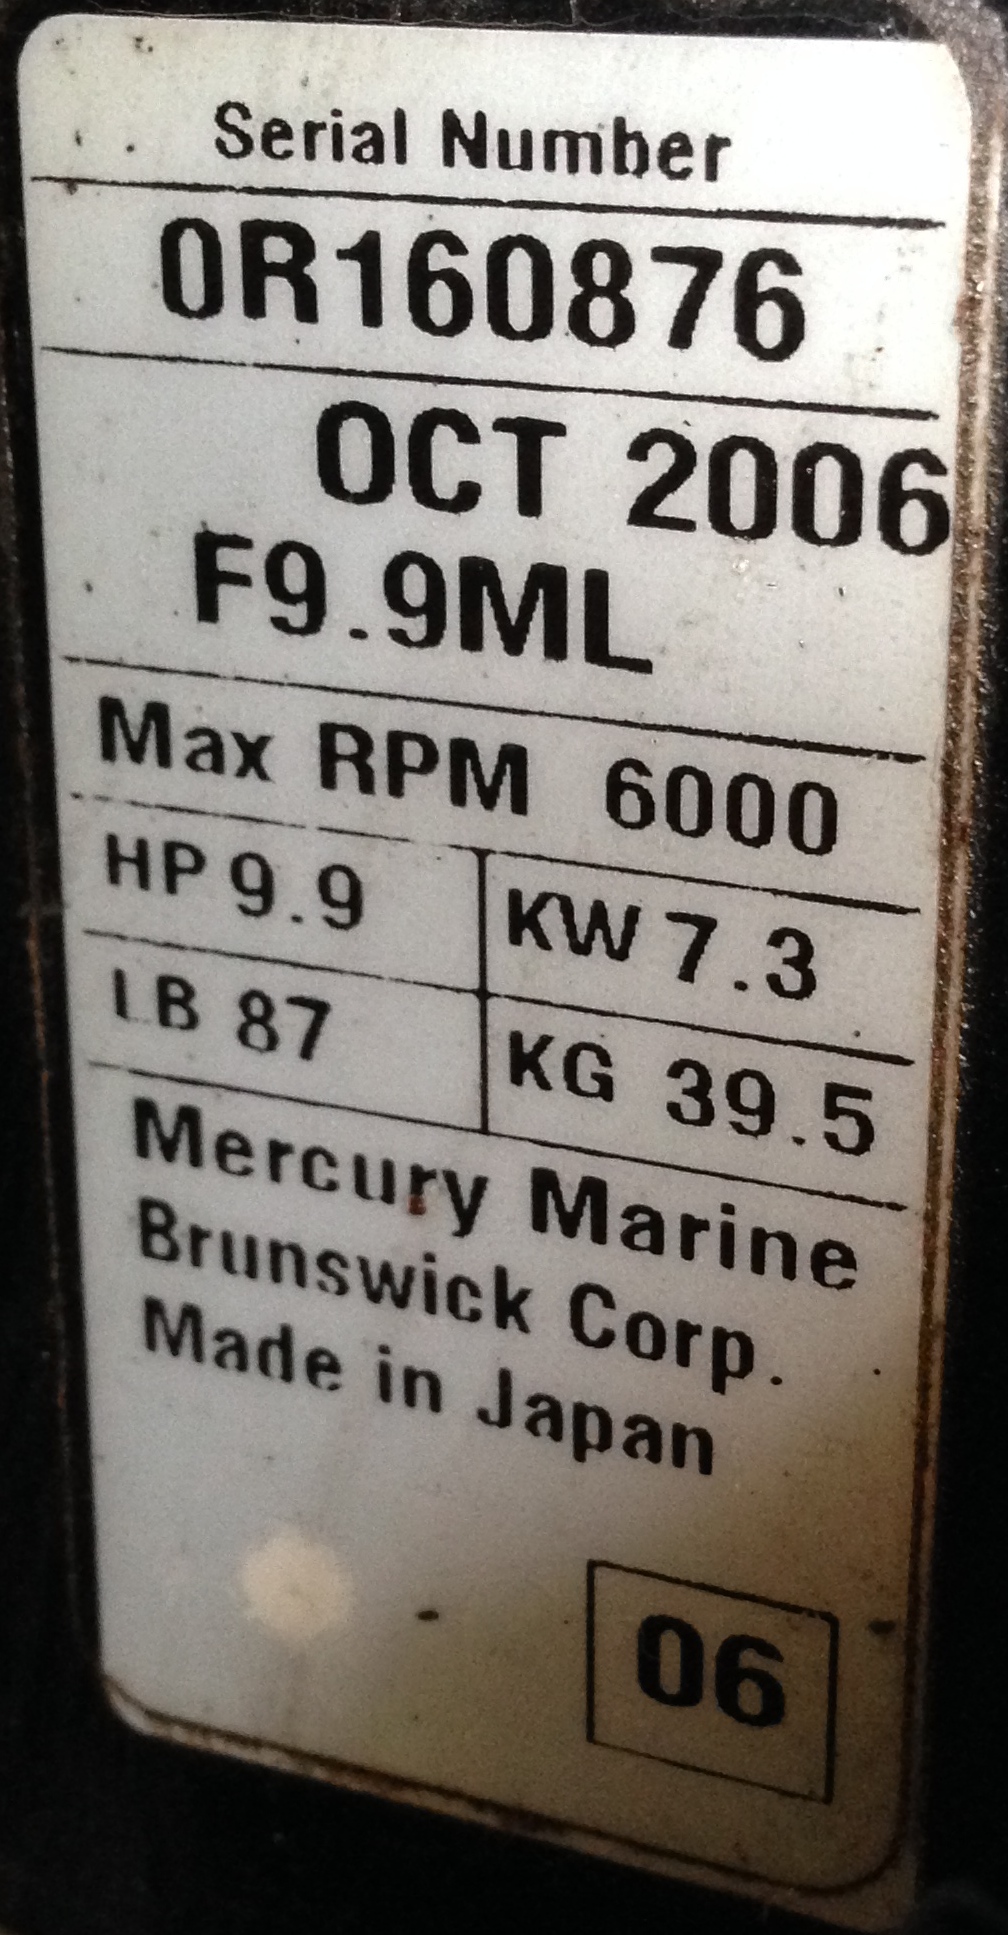 reading yamaha outboard serial numbers